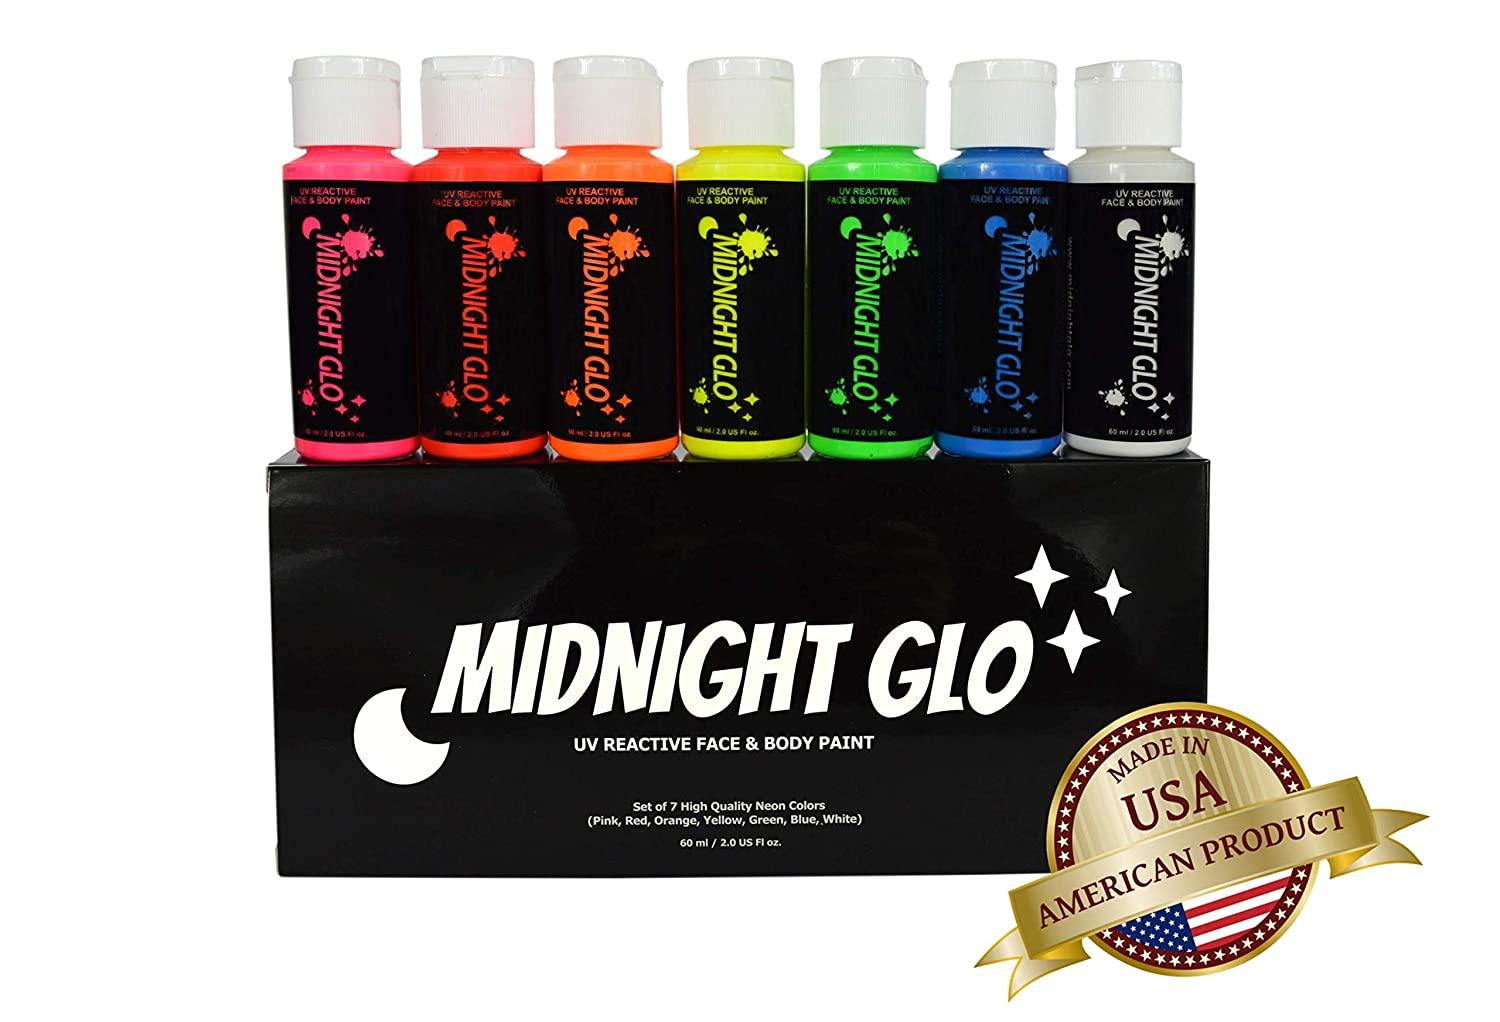 Midnight Glo Acrylic Paint Black Light Reactive Set of 8 Bottles0.75oz  Great for Crafts, Art & DIY Projects, Blacklight Party 